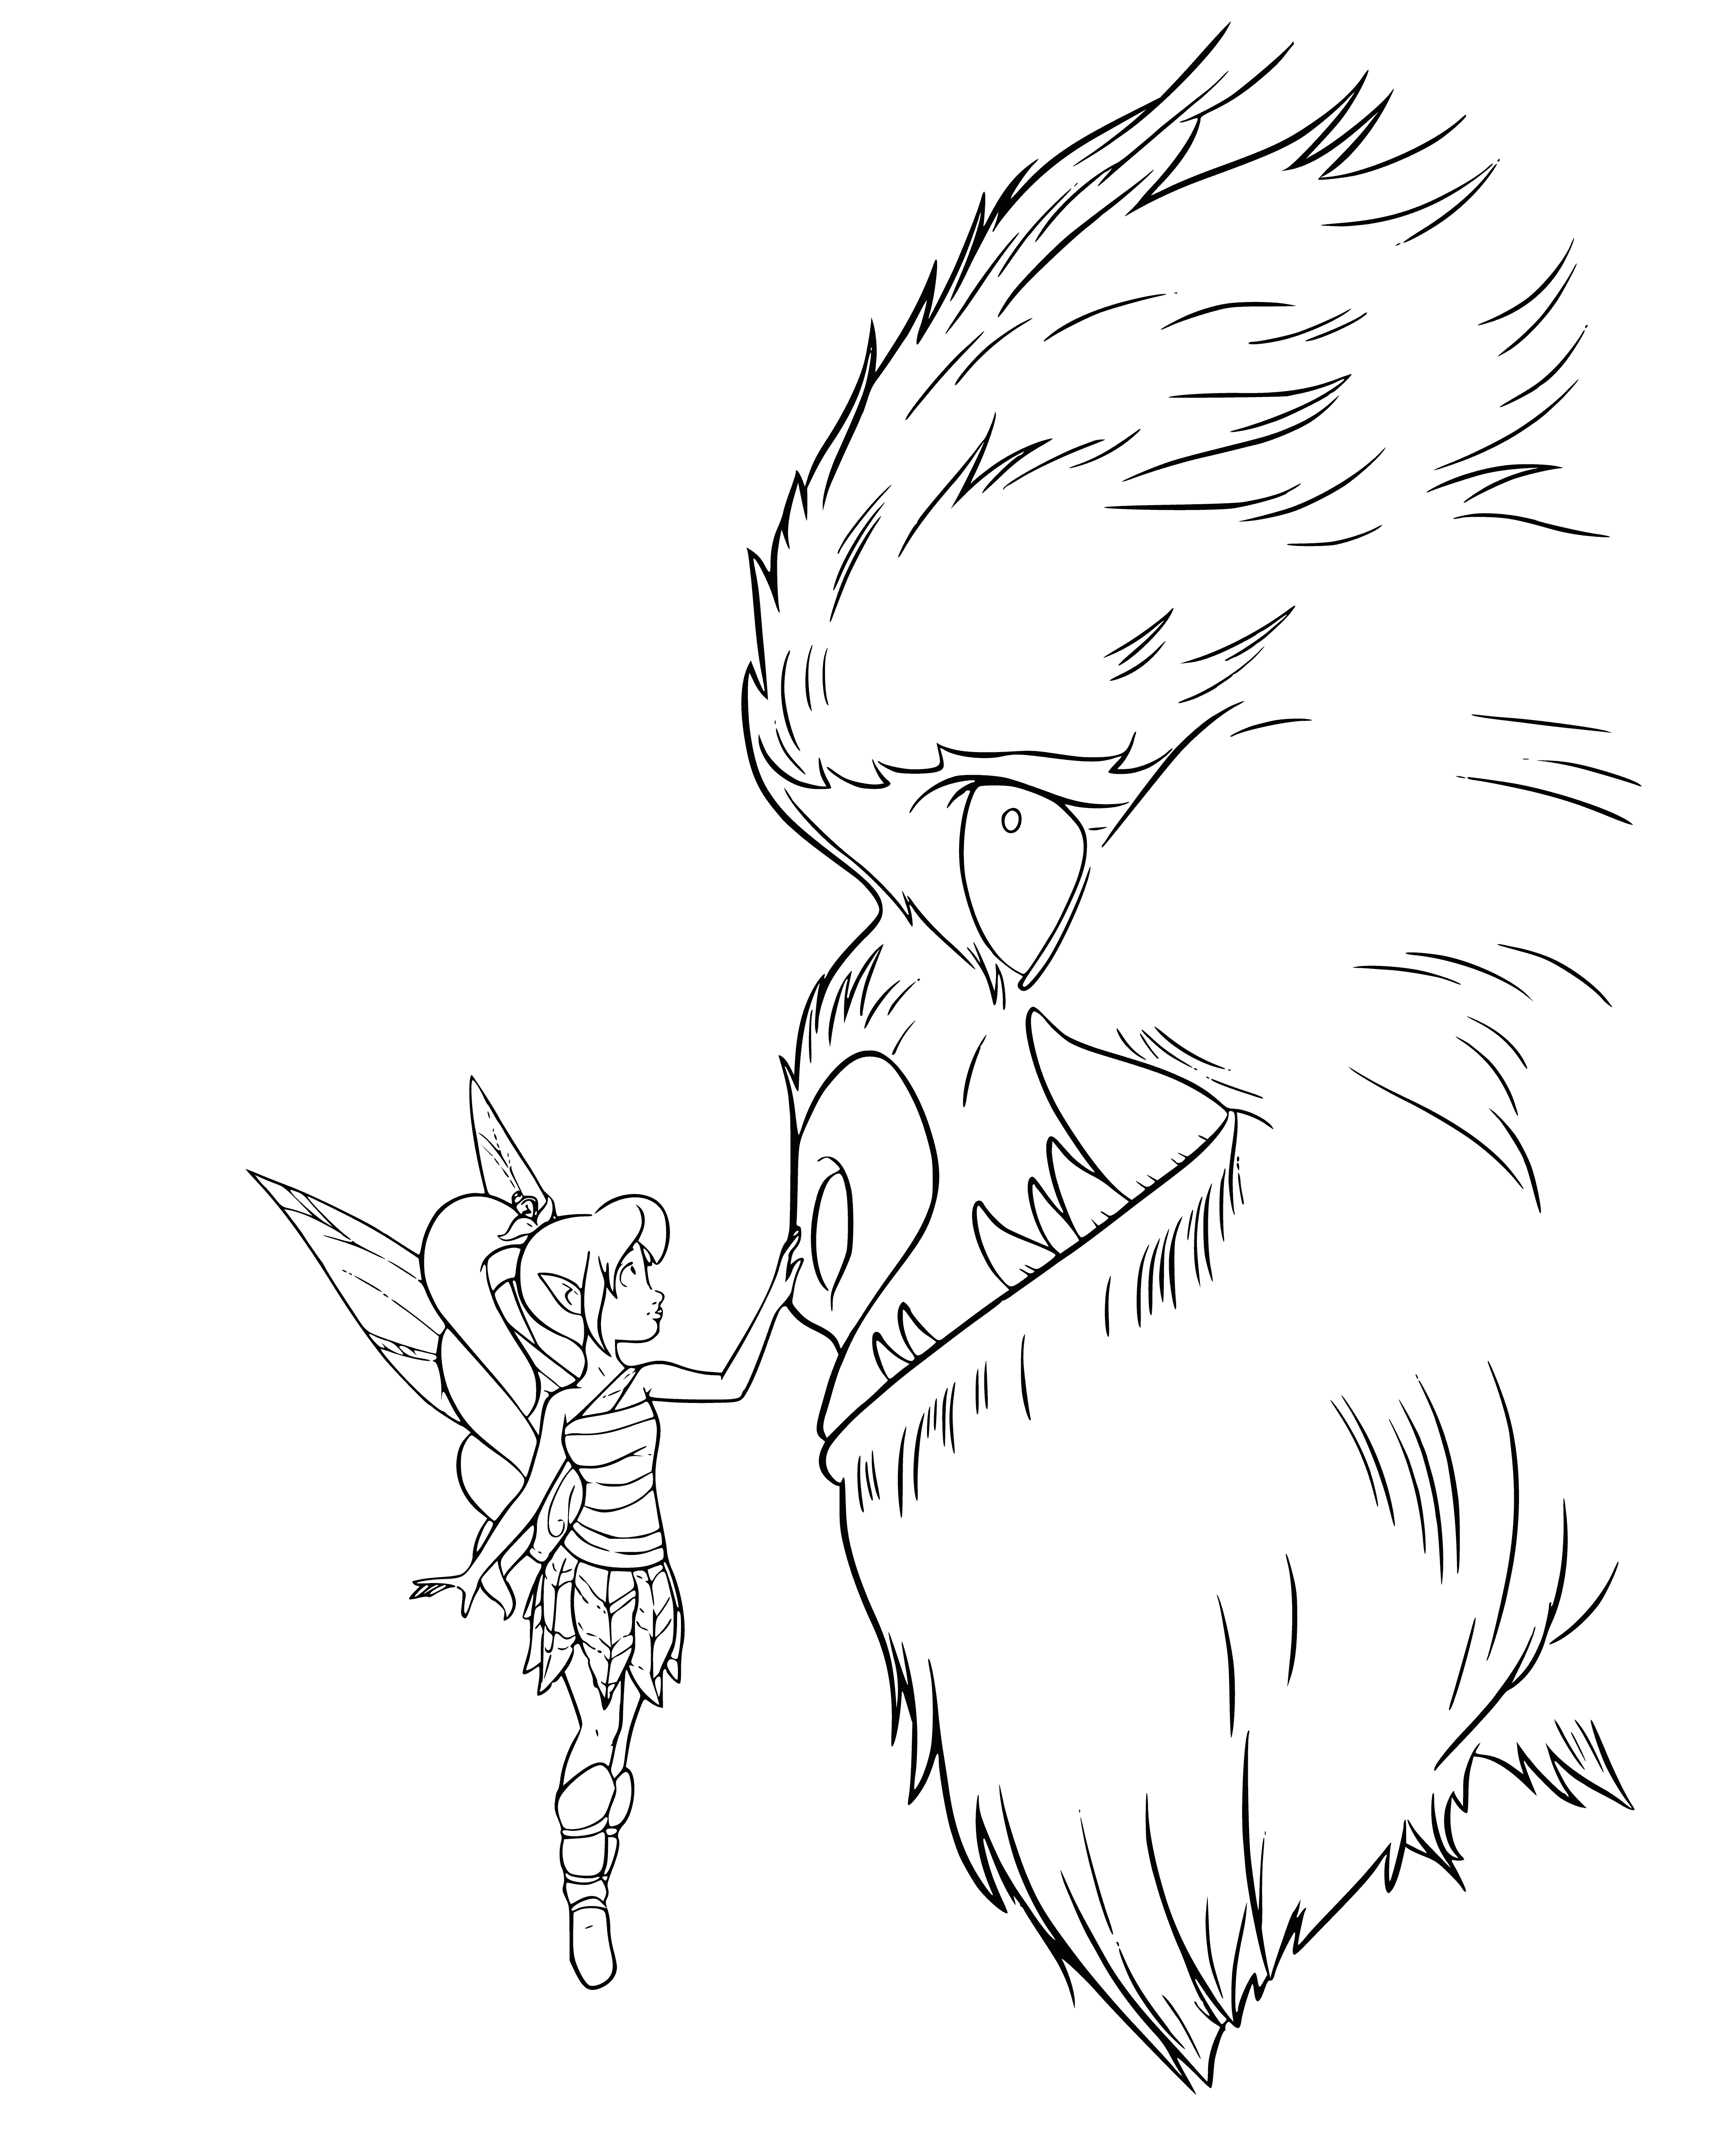 Fauna and Beast coloring page